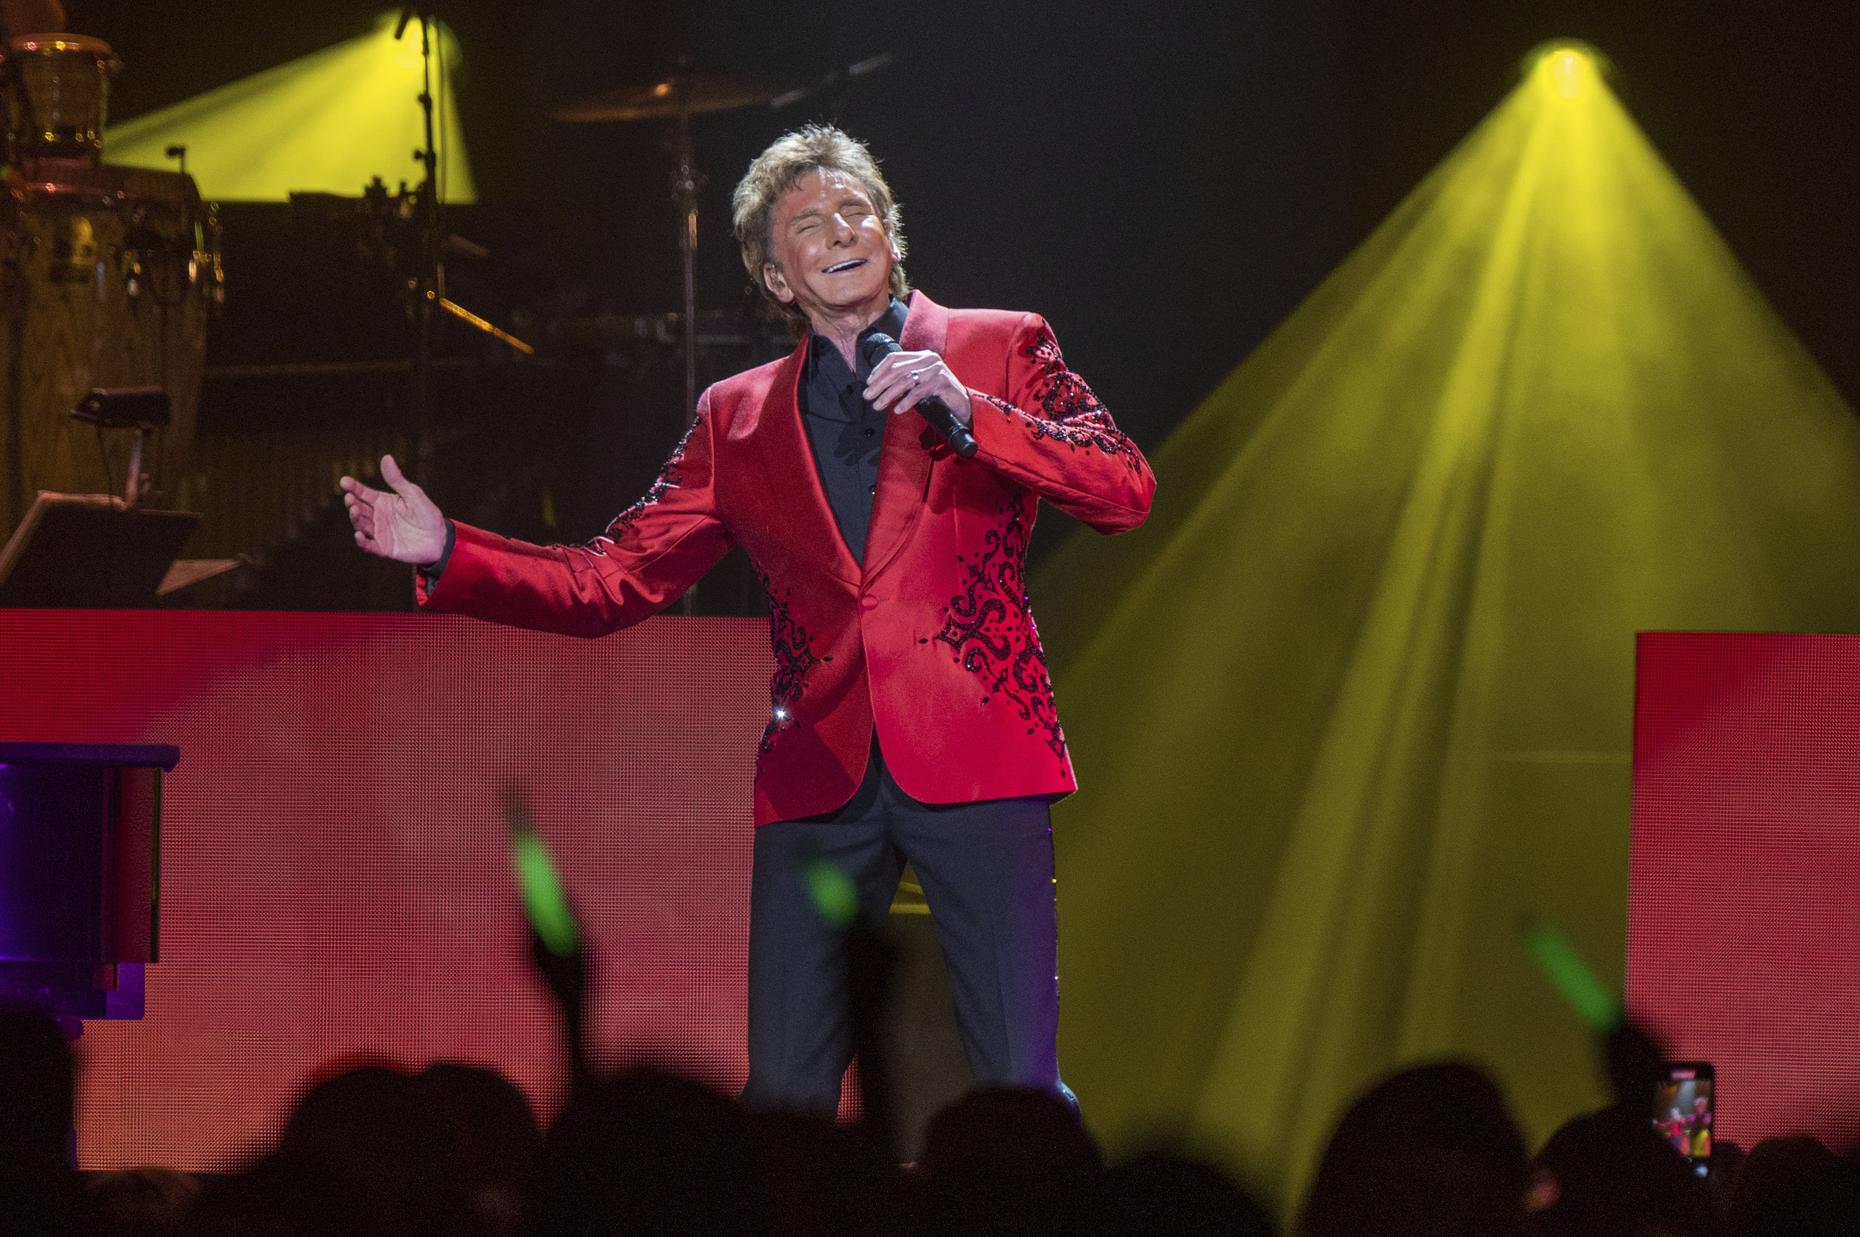 Celebrating the New York Pops with Barry Manilow | All Of It | WNYC